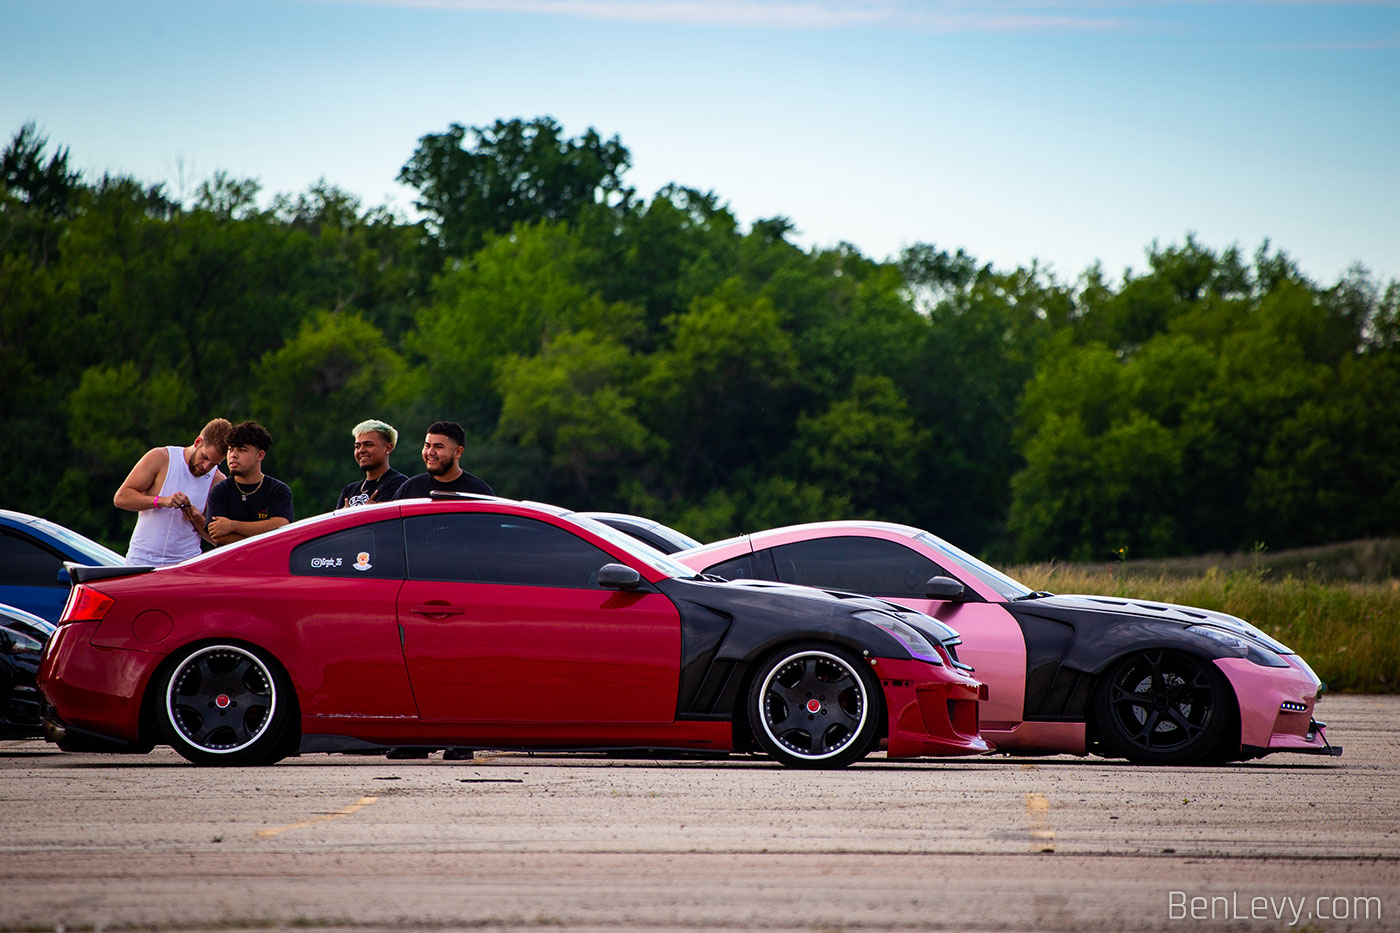 Infiniti G35 and Nissan 350Z after the Slammedenuff Chicago Car Show